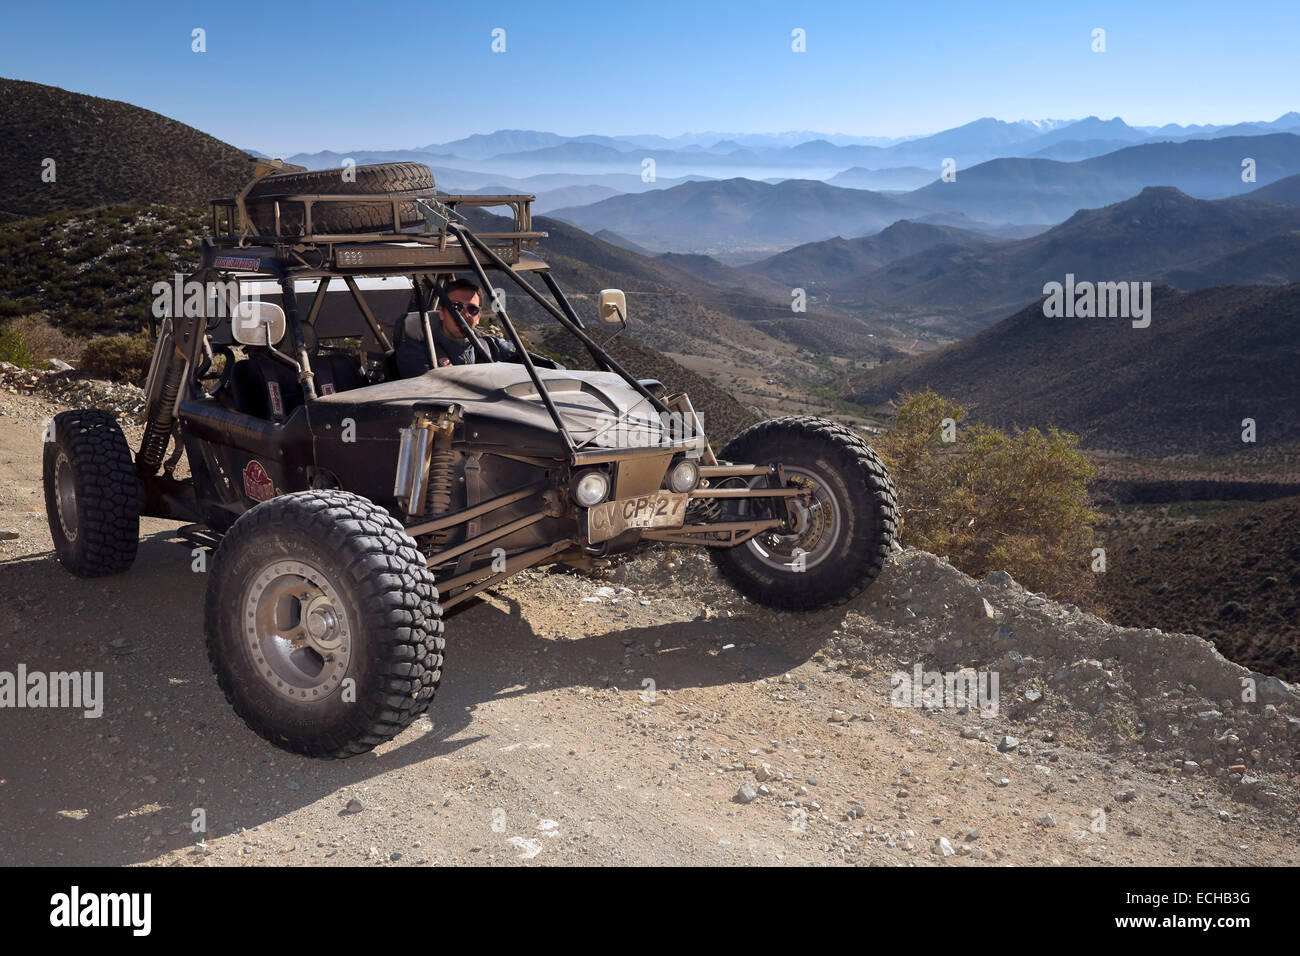 Baja 1000 race car belonging to 'The Gentleman Driver' company on a road overlooking Las Chinchillas National Reserve. Coquimbo Stock Photo